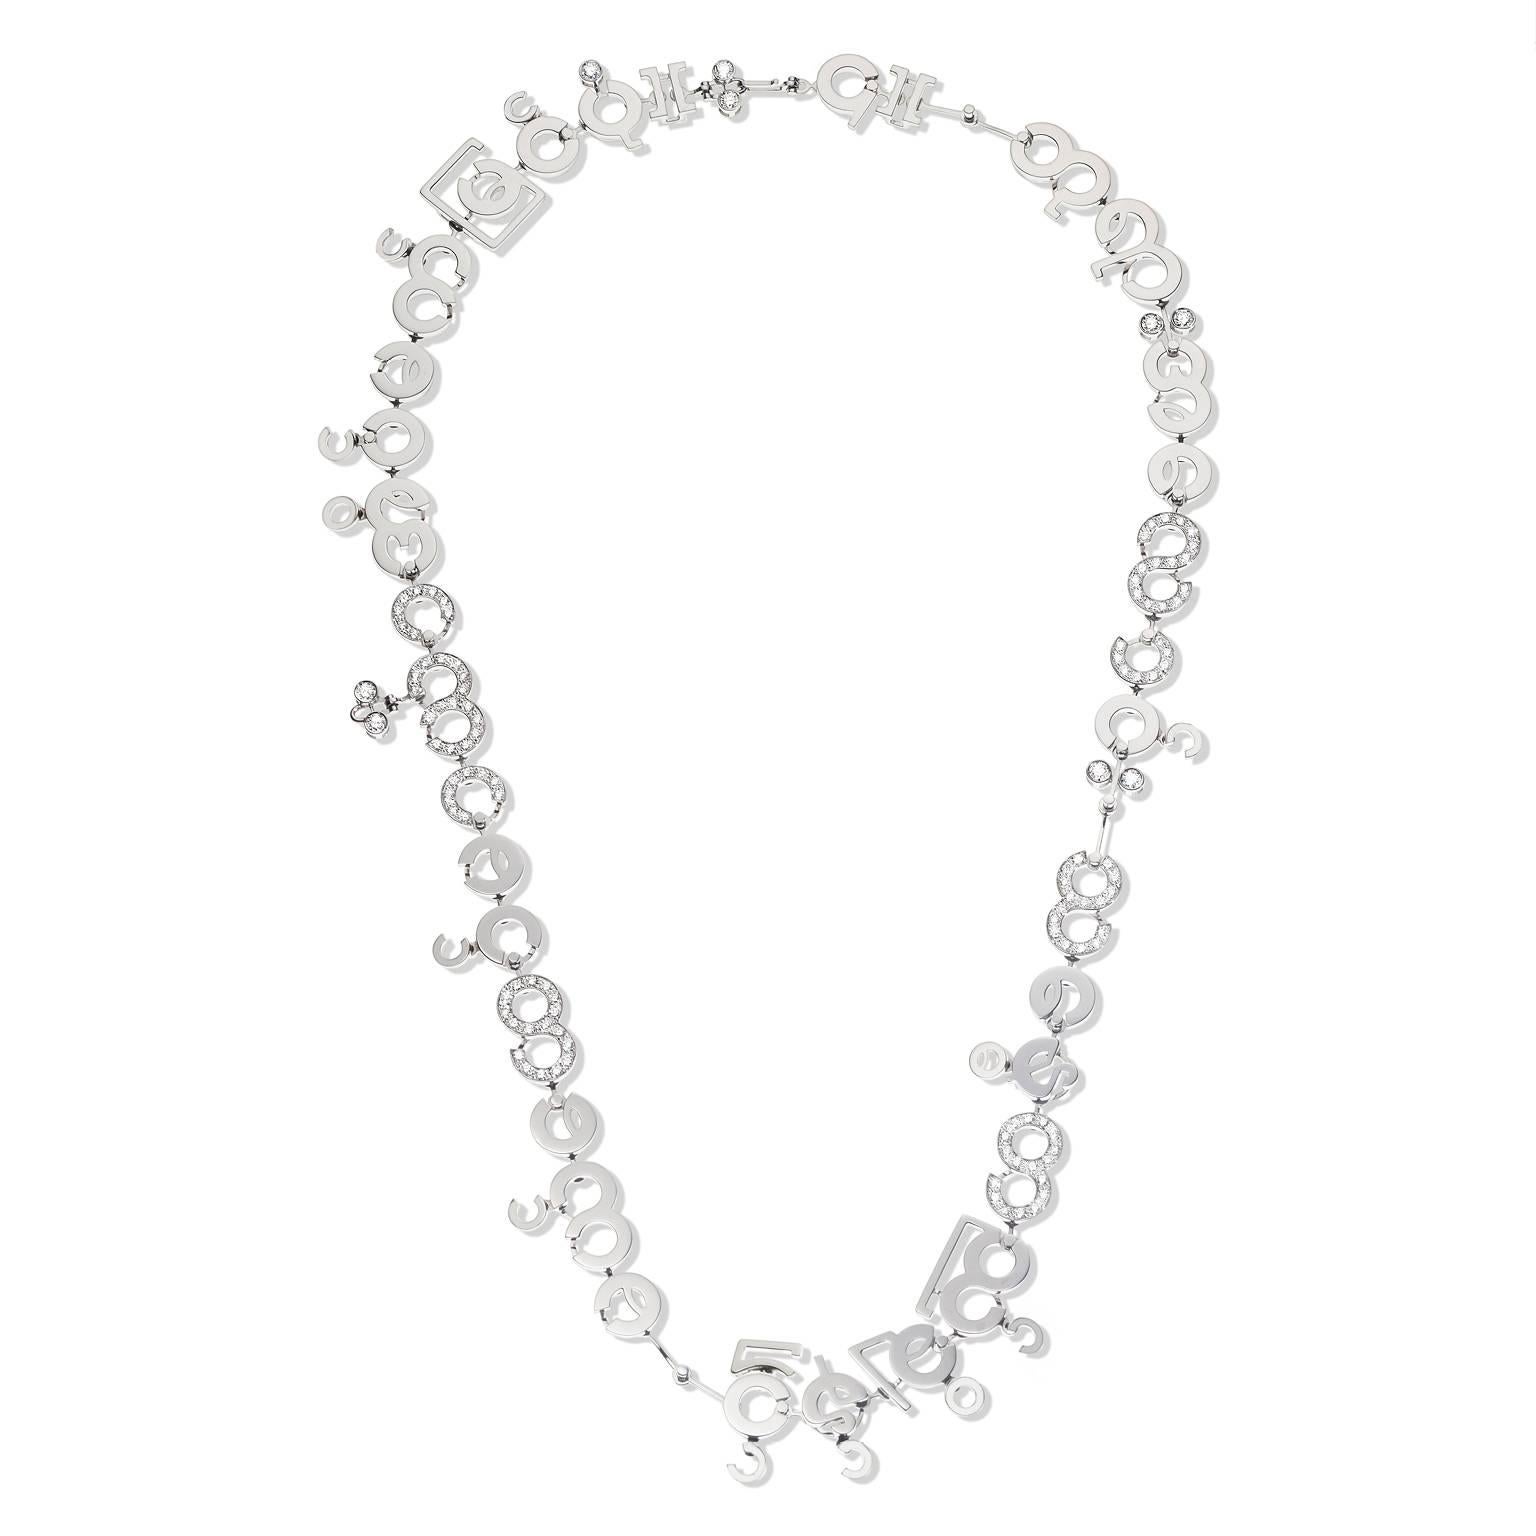 Round Cut Nathalie Jean Contemporary 3.05 Carat Diamond White Gold Chain Drop Necklace For Sale